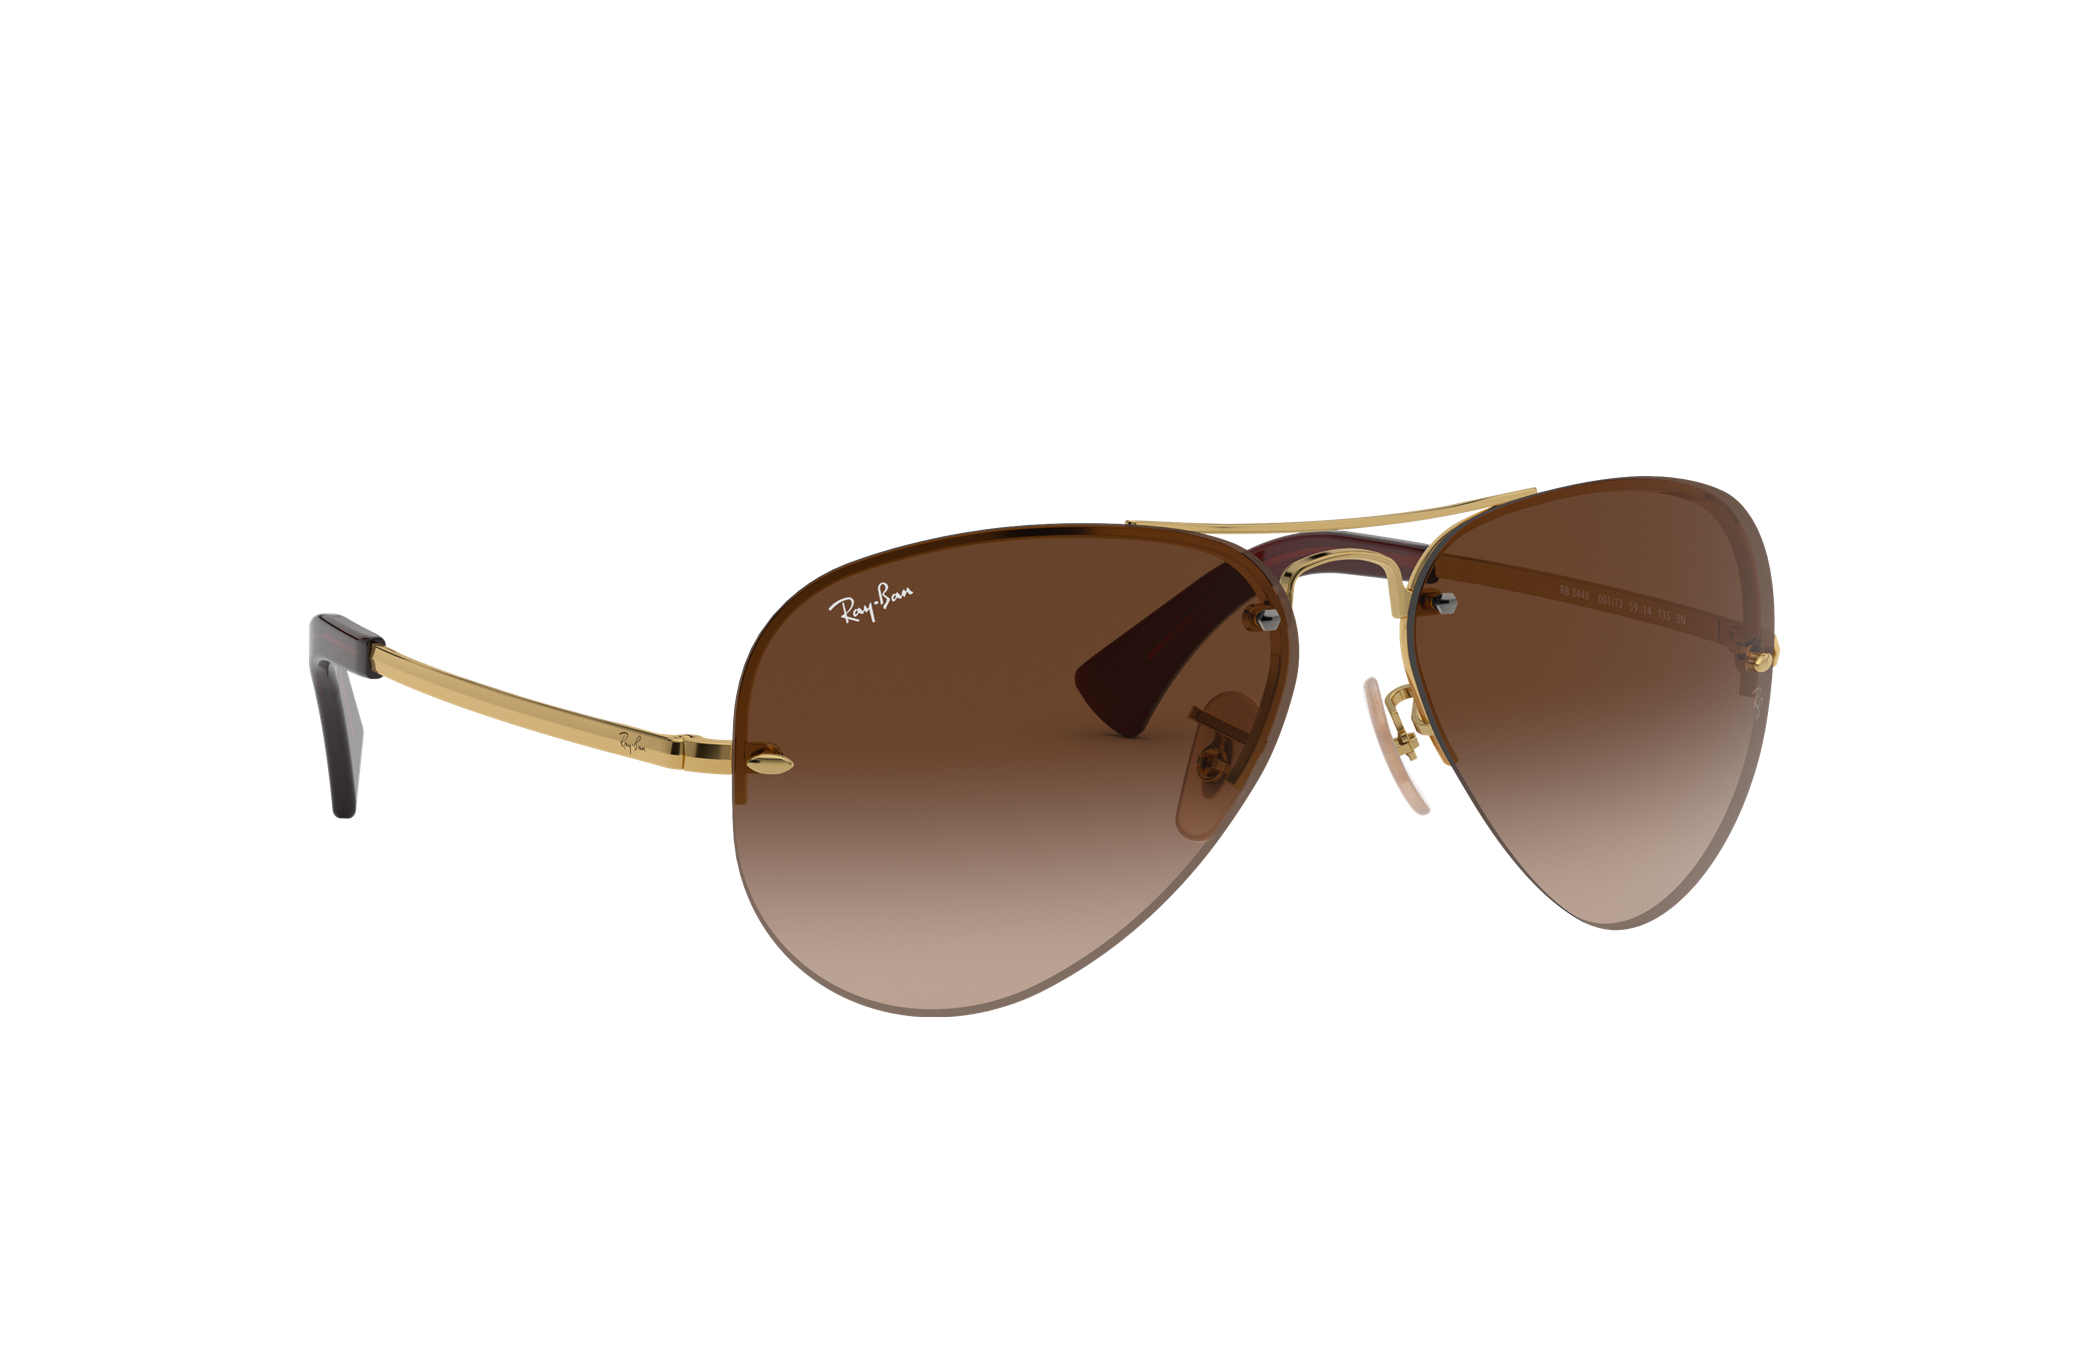 - Save 6% Womens Mens Accessories Mens Sunglasses Ray-Ban Rb3449 Sunglasses Frame Brown Lenses in Gold Metallic 